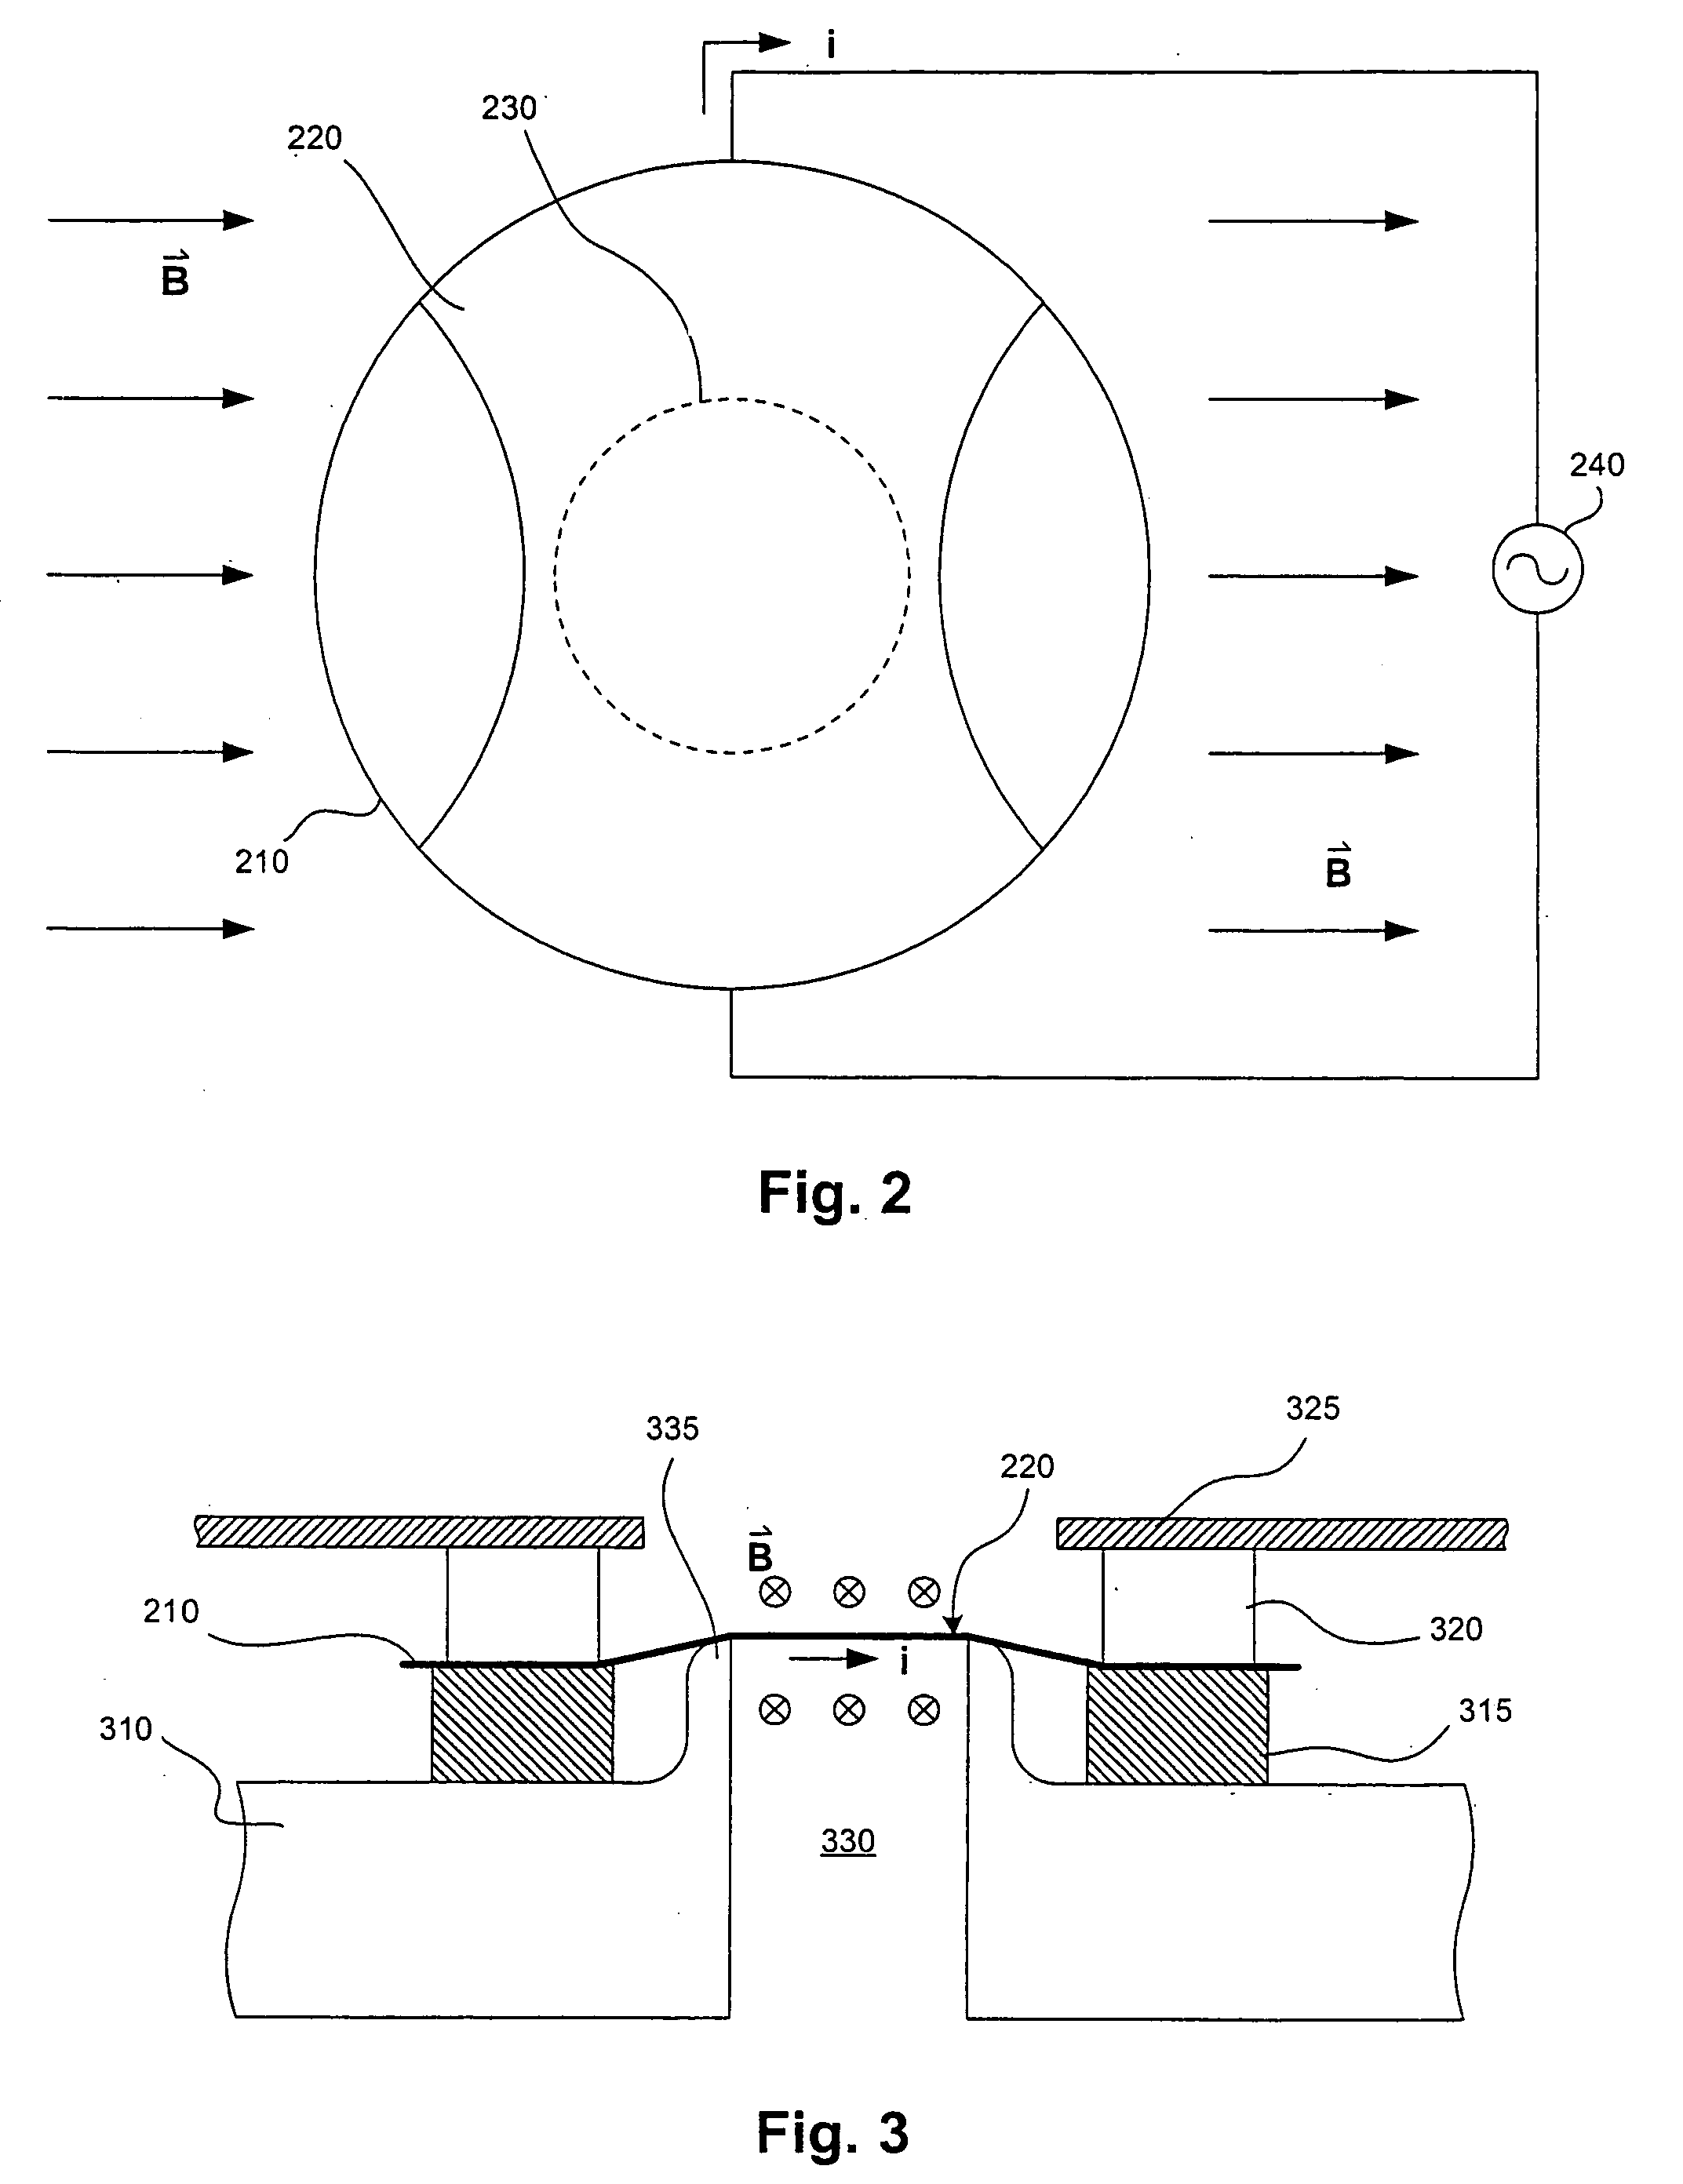 Electromagnetically driven membrane mirror assembly